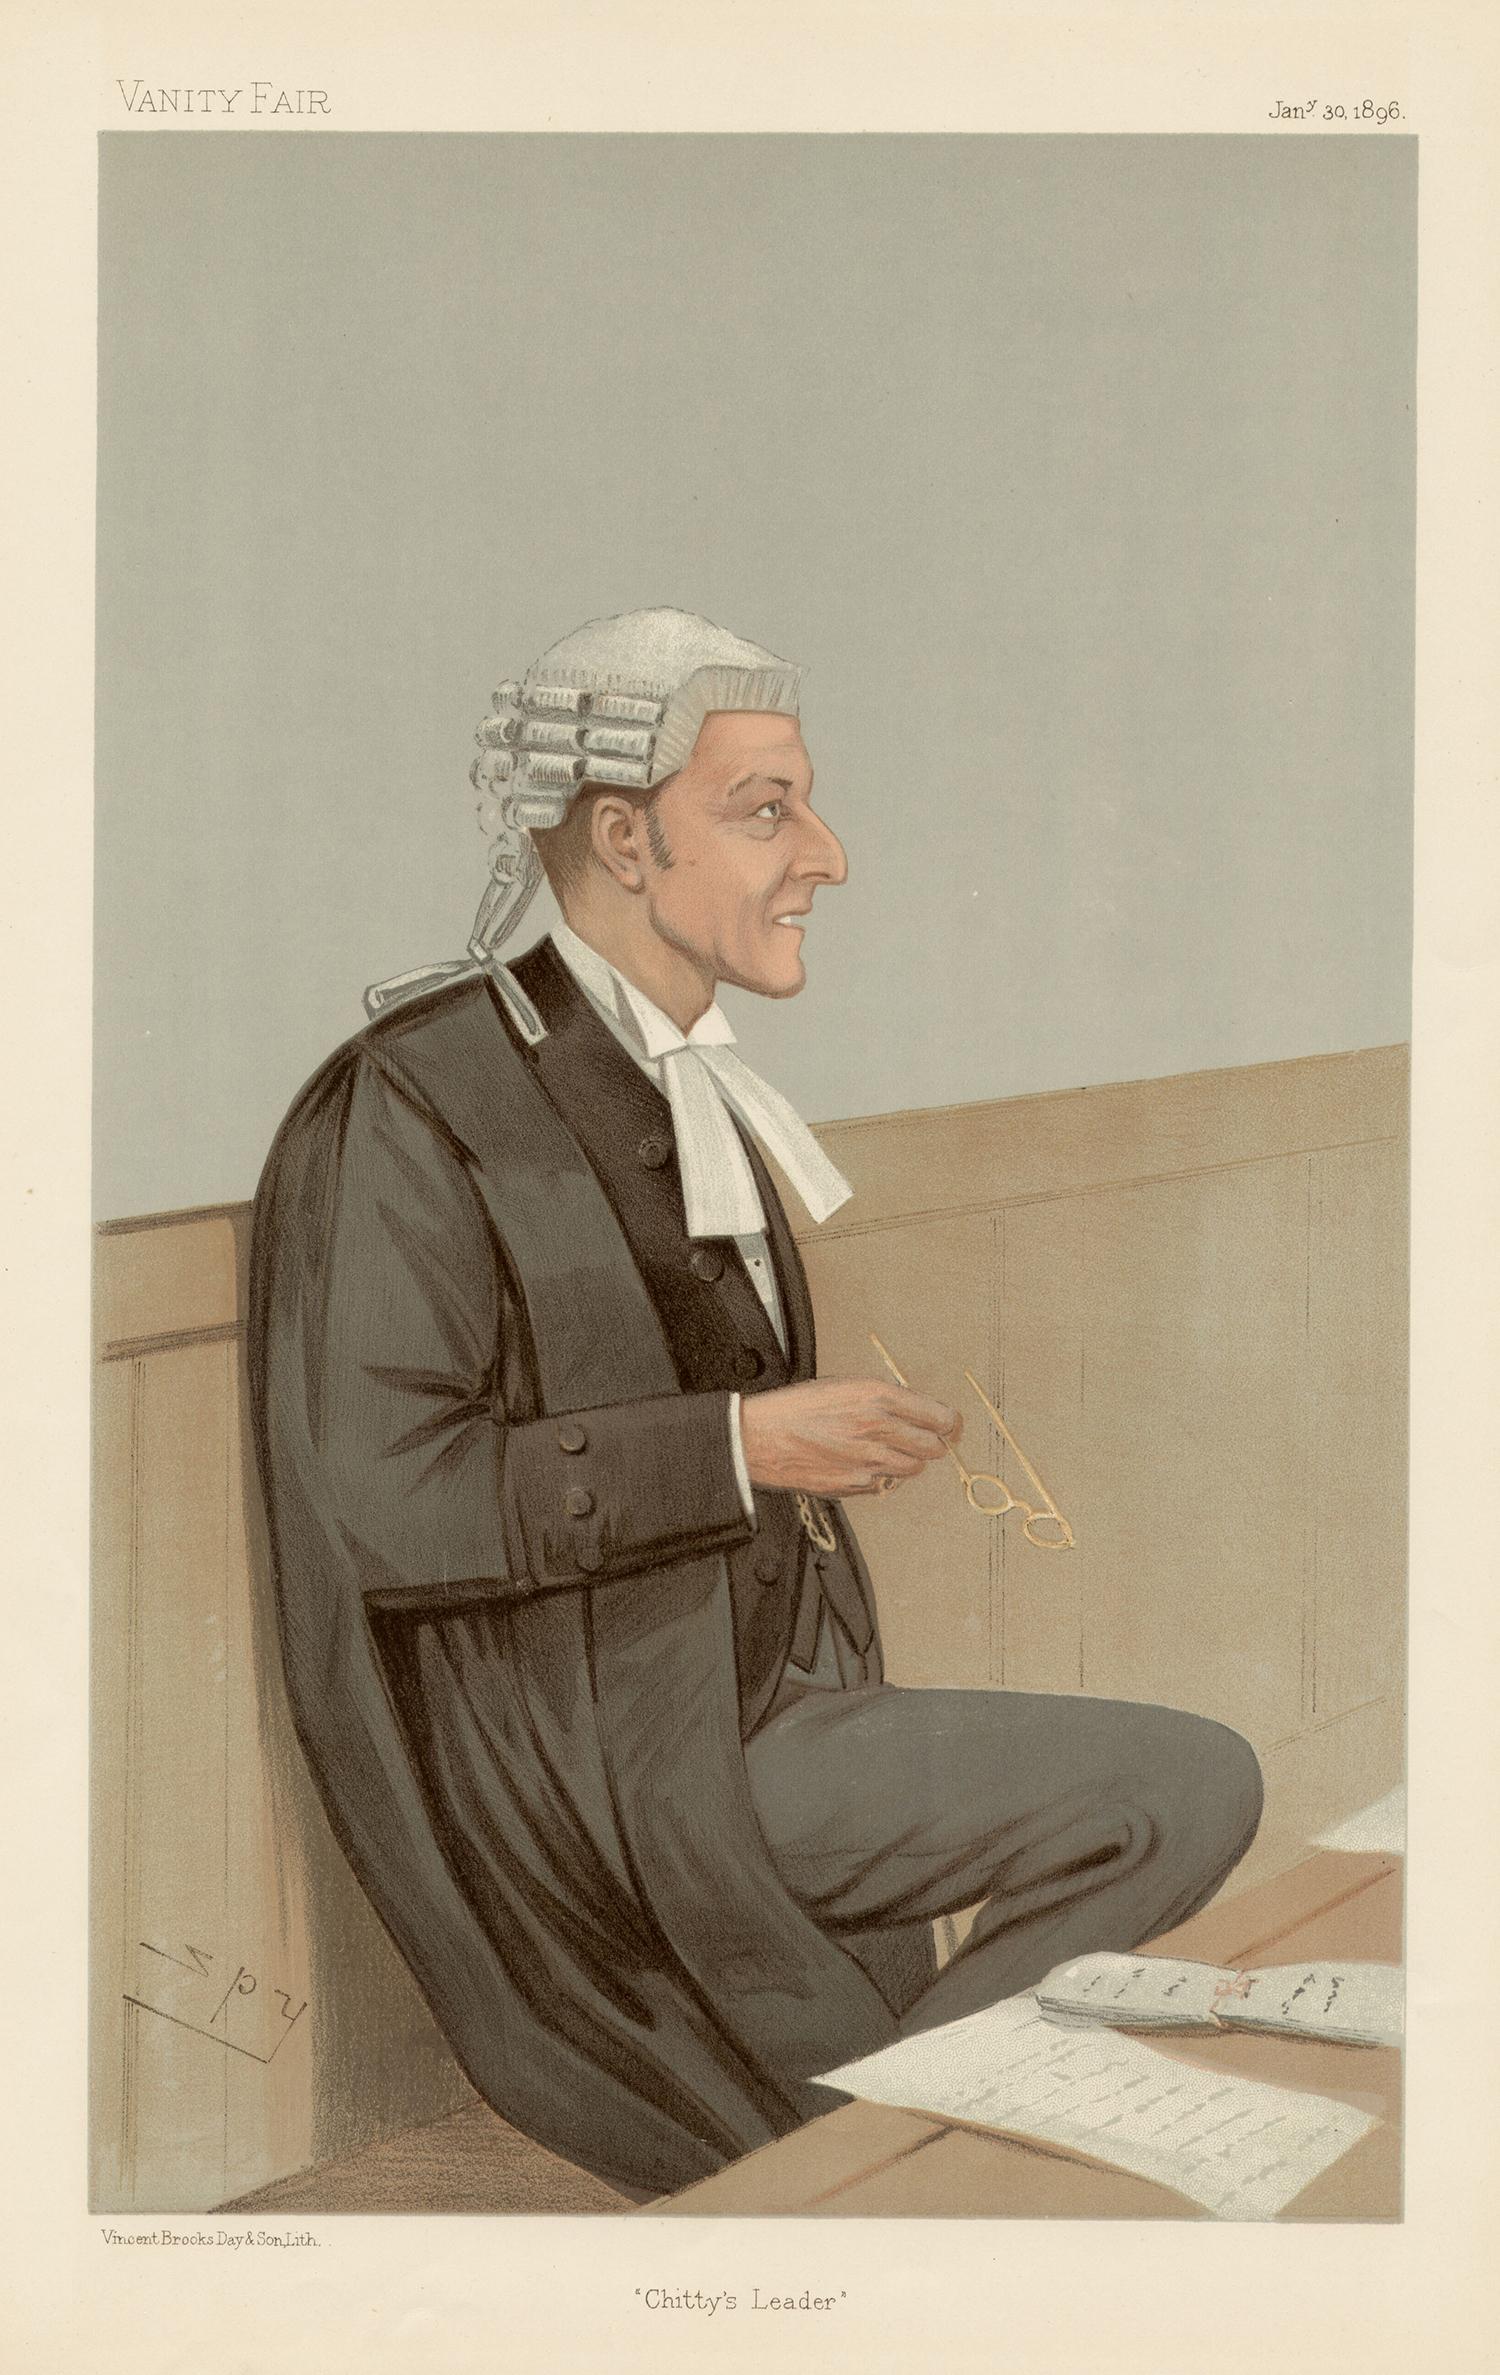 Sir Leslie Ward Figurative Print - Chitty's Leader, Vanity Fair legal chromolithograph of a judge, 1896